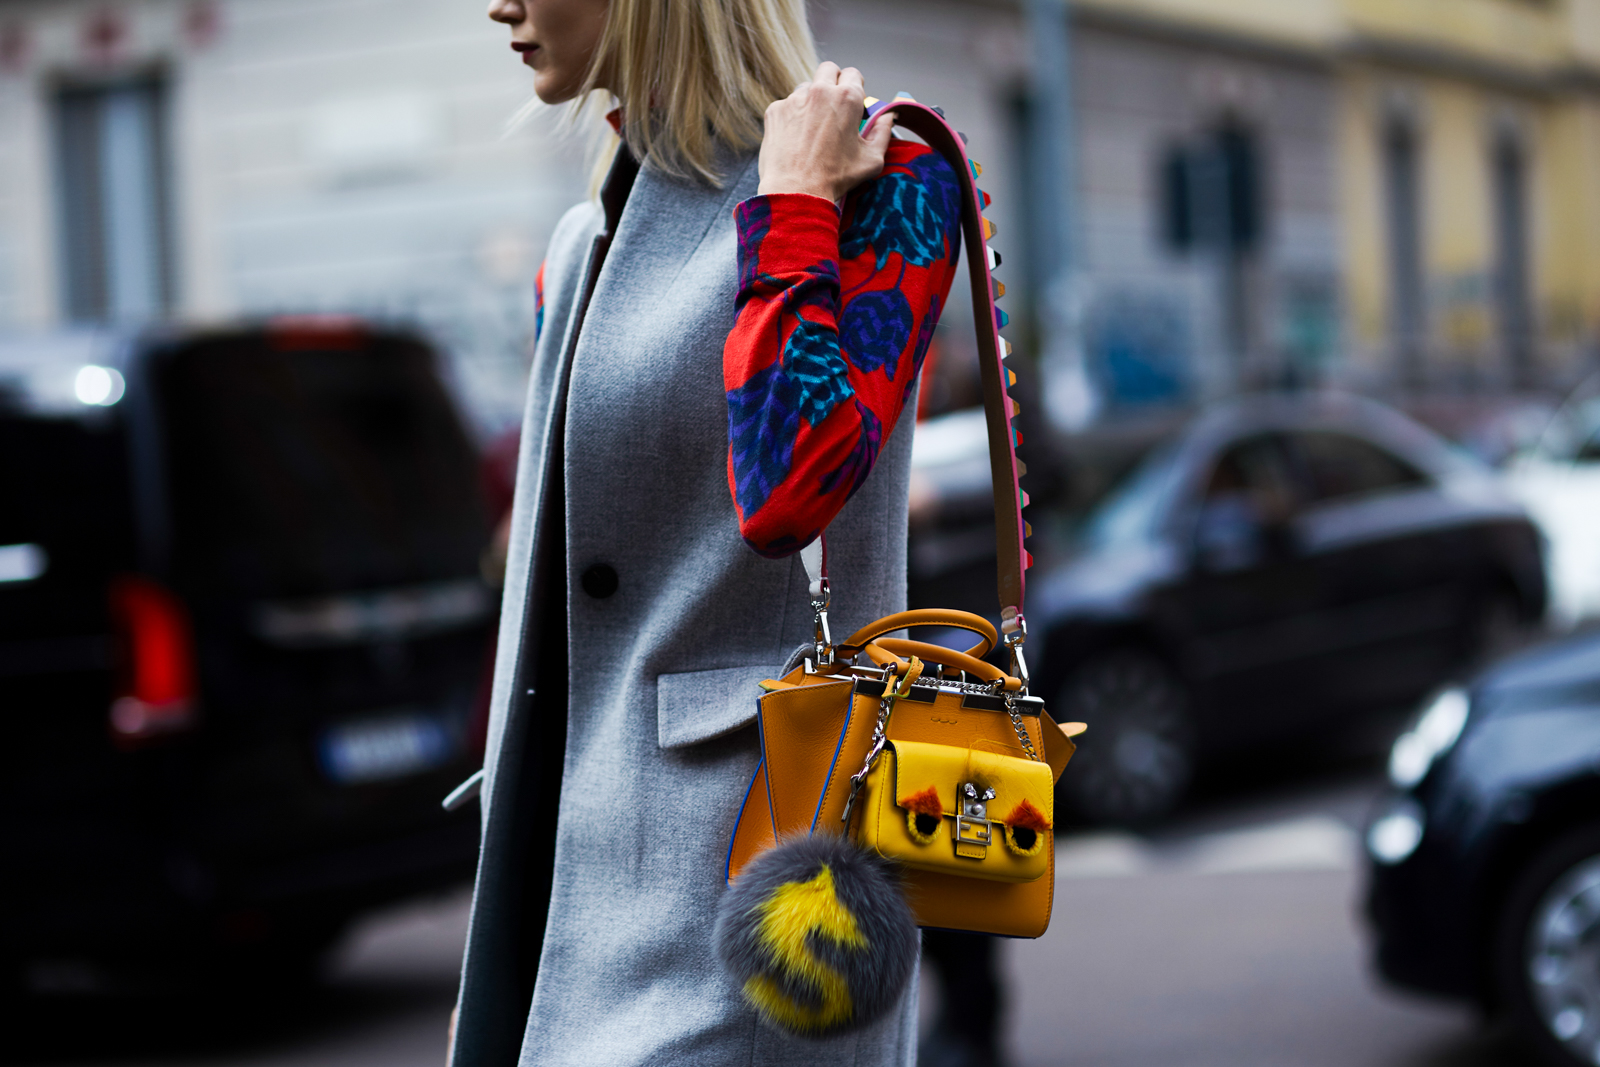 MFW Street Style: Samantha Angelo wearing a Fendi bag before the Fendi Fall 2016 fashion show in Milan, Italy